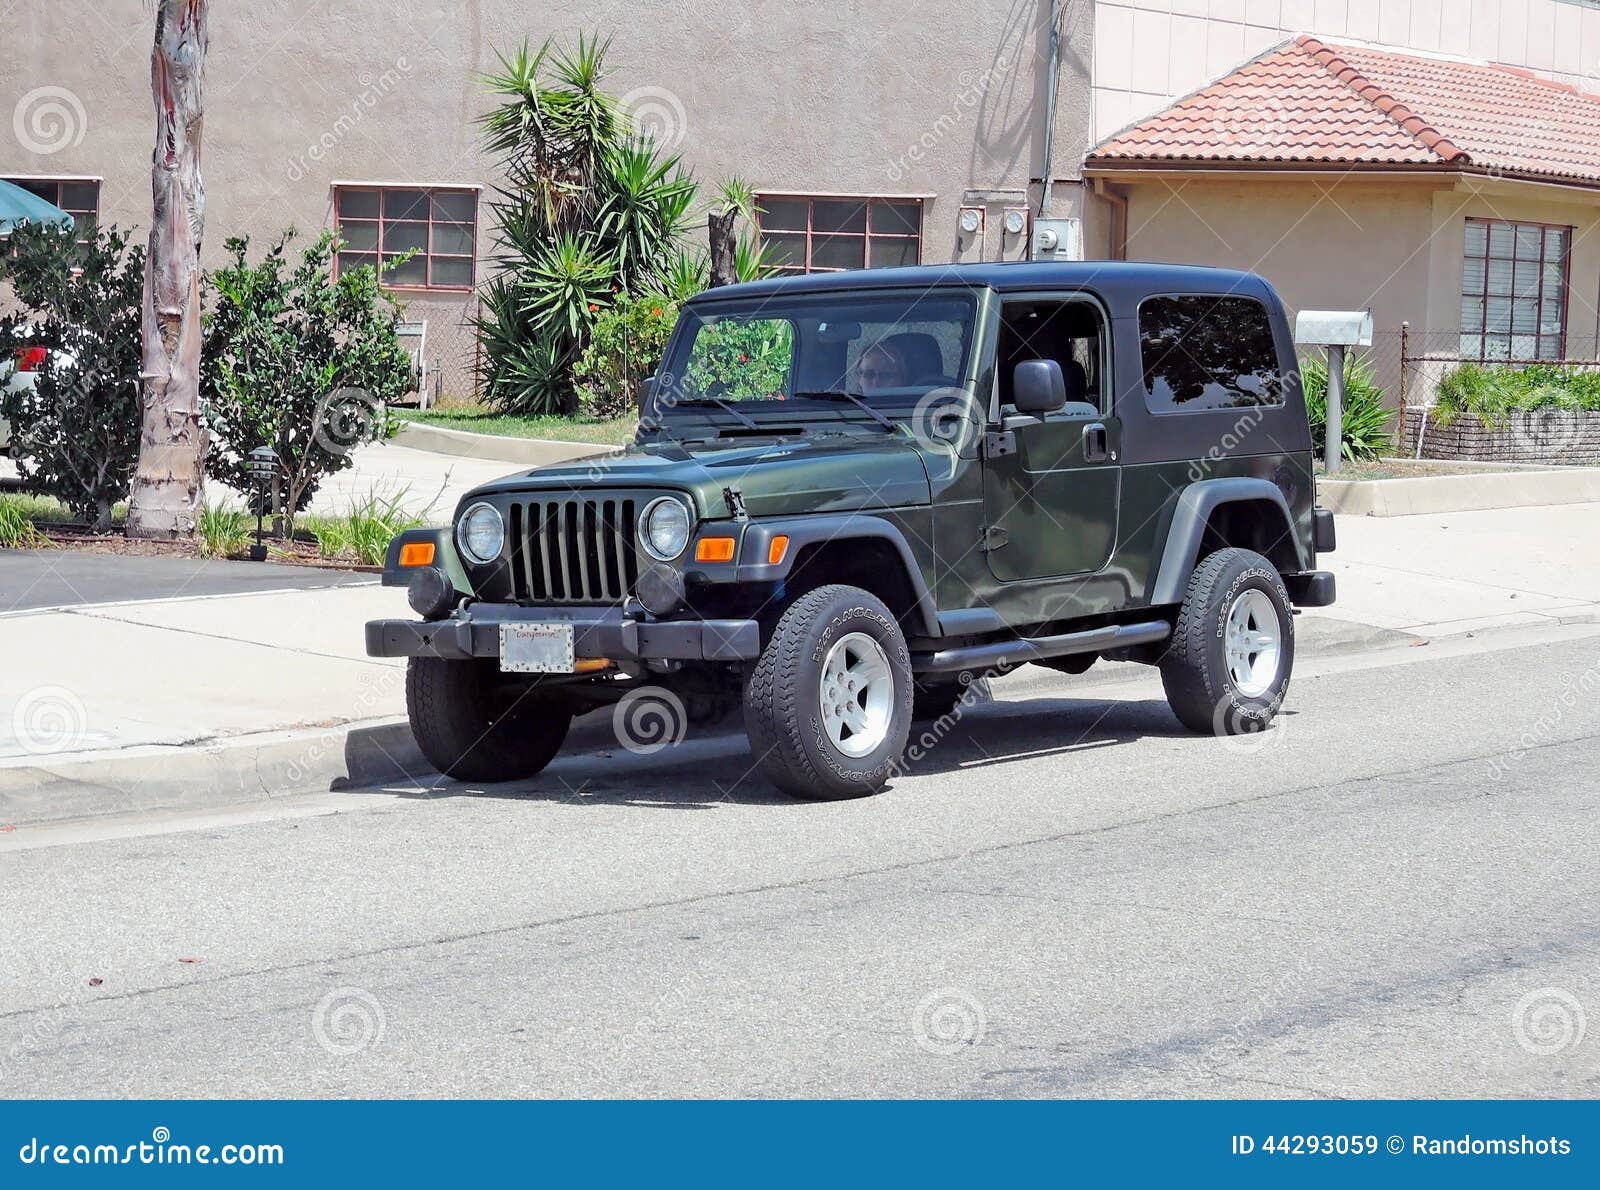 Jeep Wrangler Unlimited editorial stock image. Image of wheel - 44293059